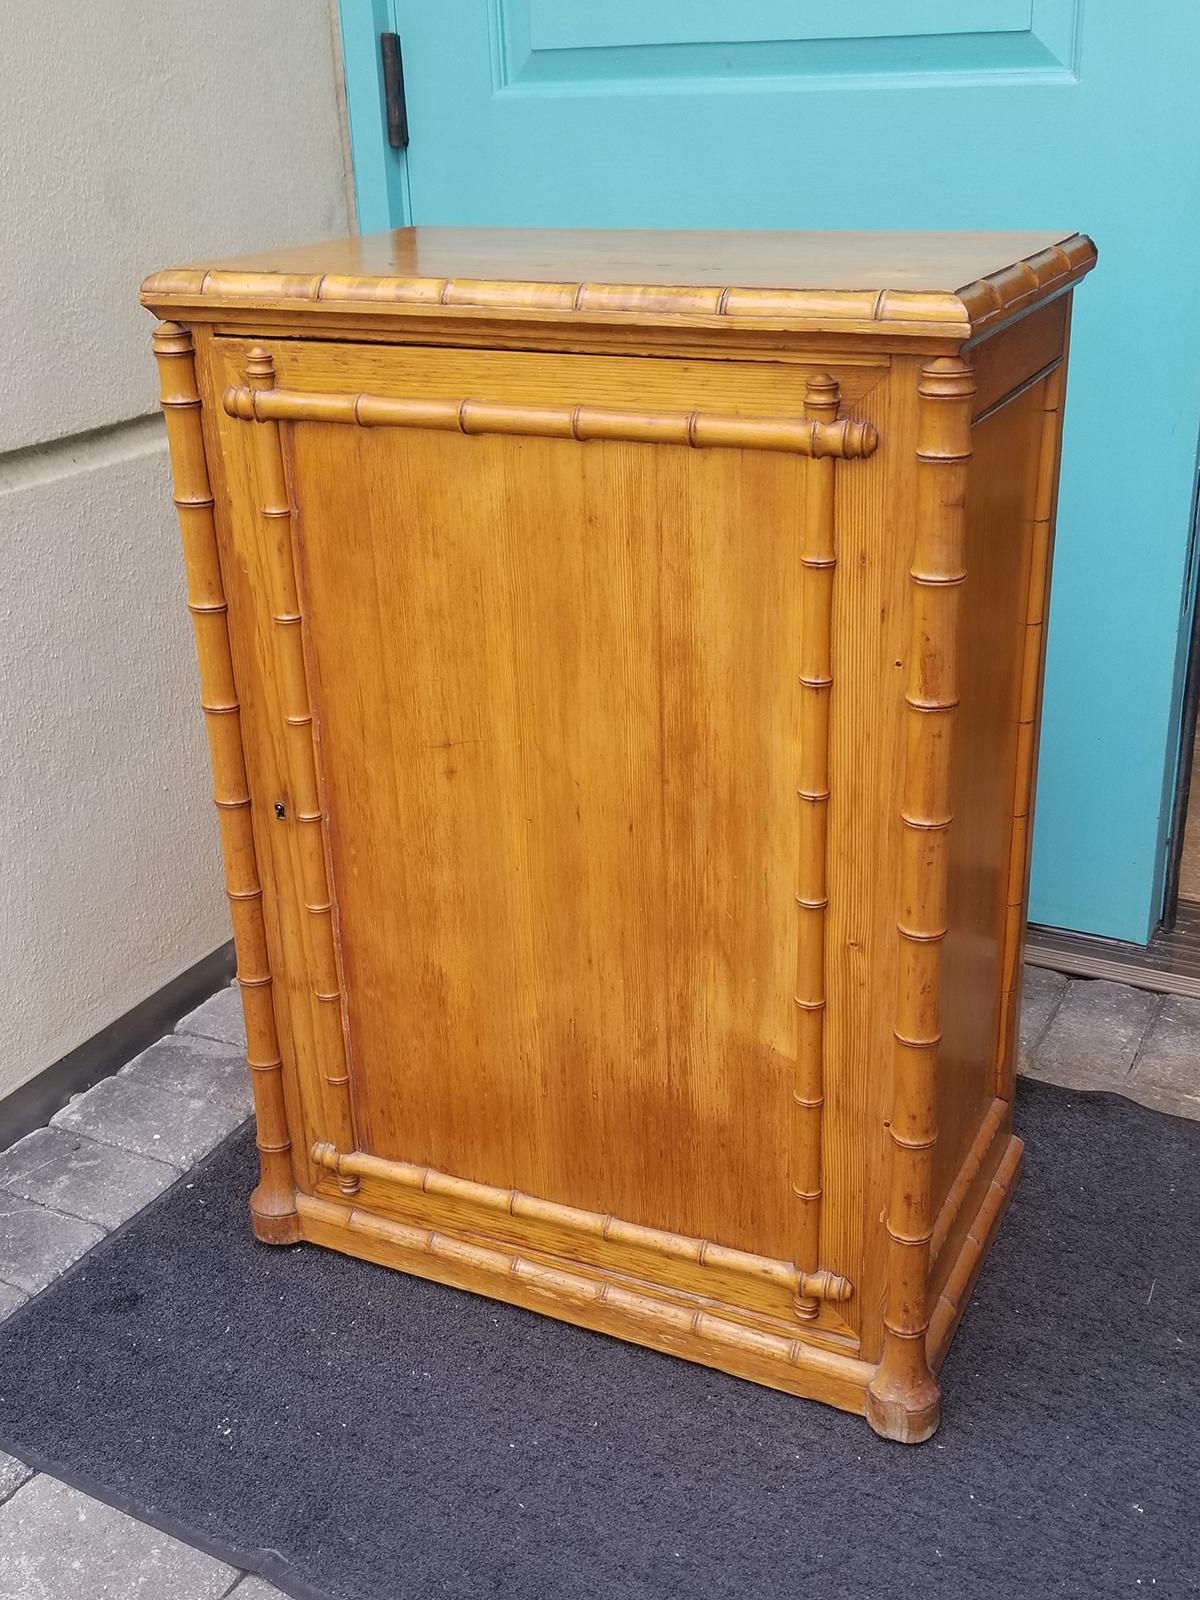 Circa 1880-1900 French Bamboo Style One Door Cabinet In Good Condition For Sale In Atlanta, GA